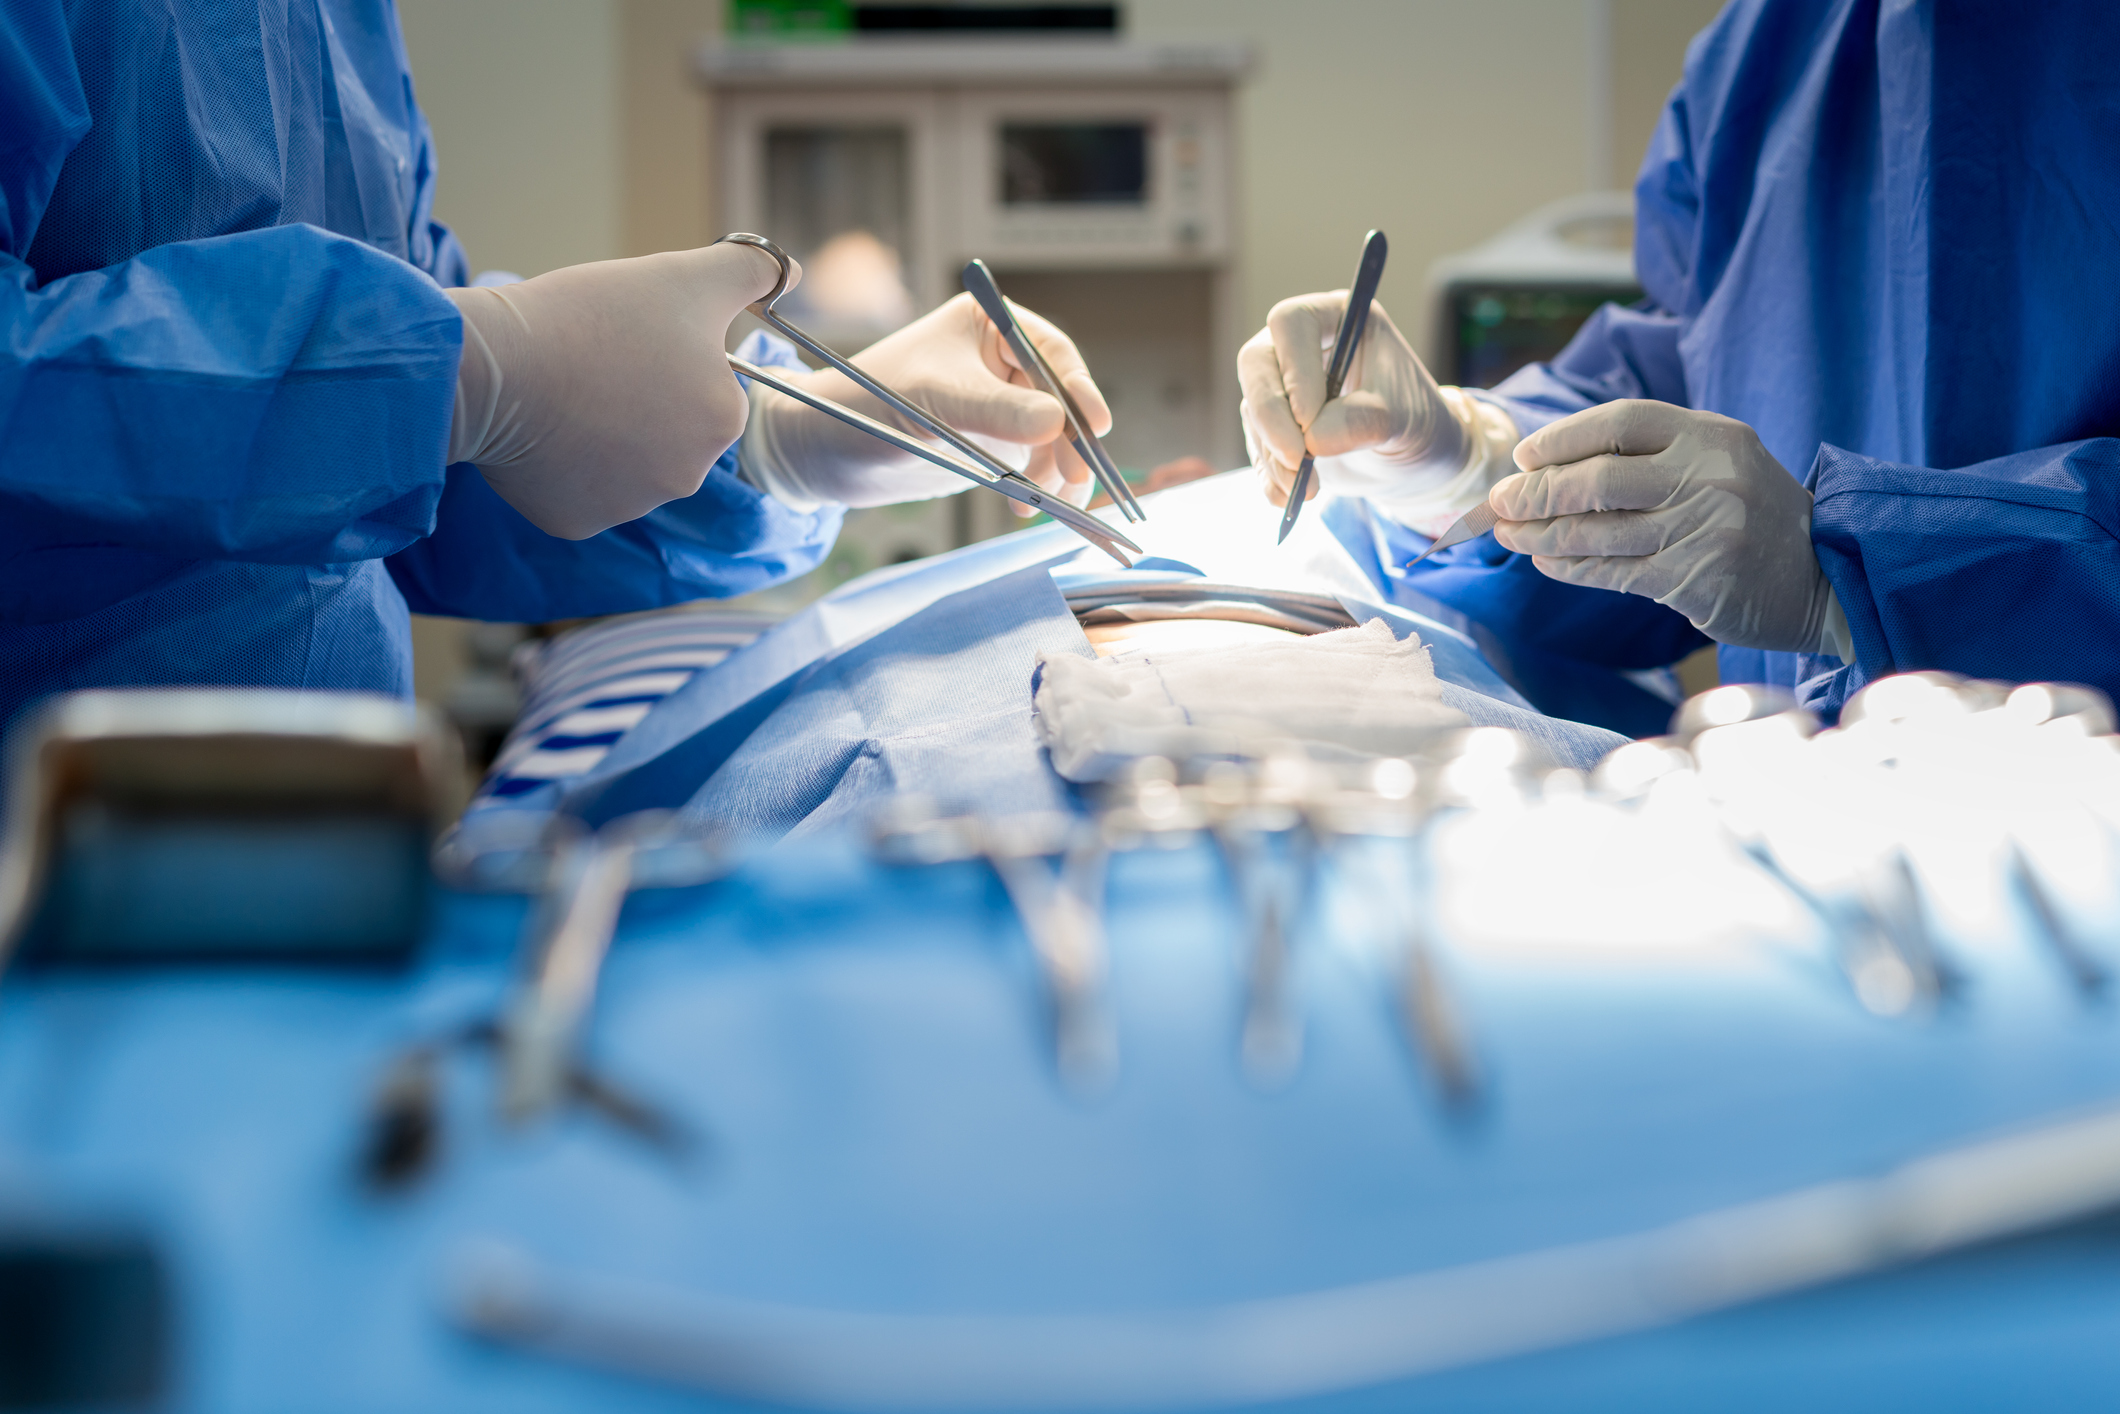 Surgeons performing a procedure in an operating room.